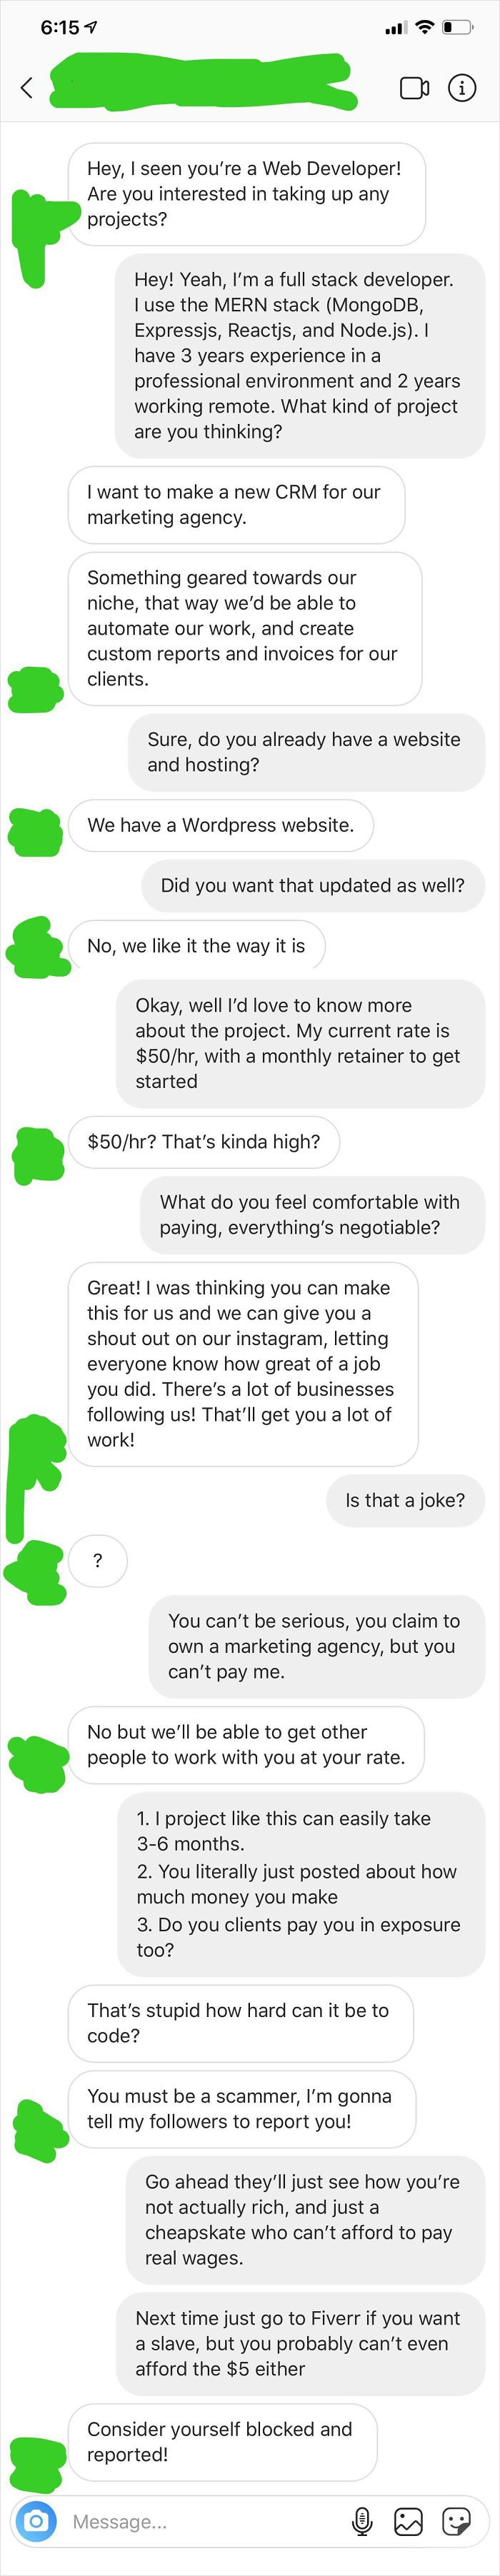 This Fake Guru Has 186k Followers And Always Post About How Much Money He Makes